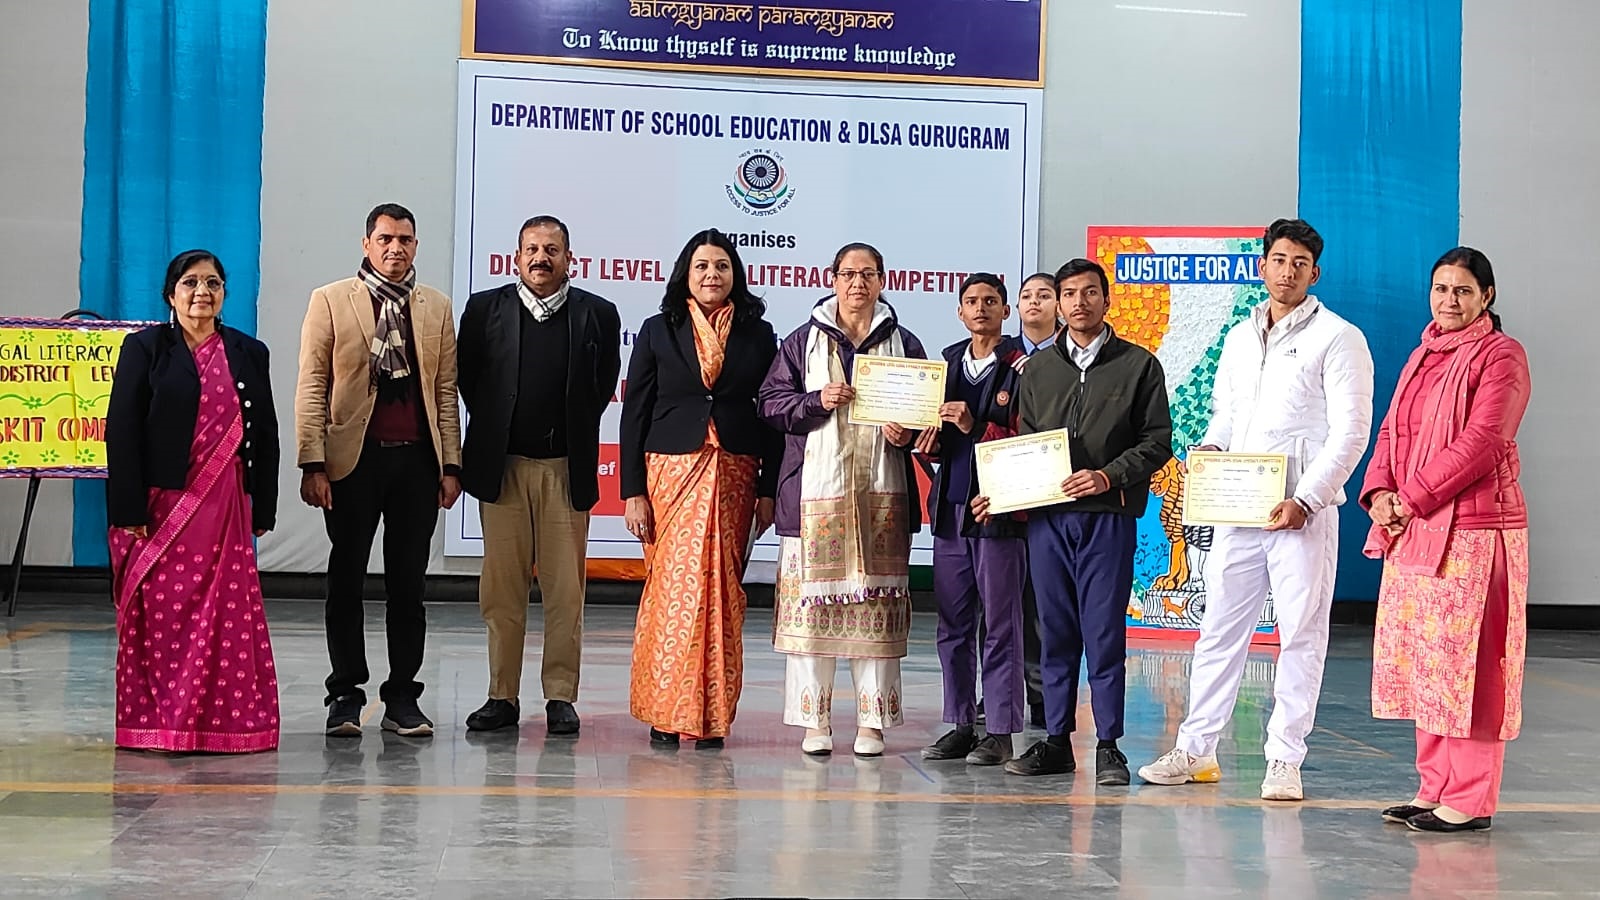 DISTRICT LEVEL LEGAL LITERACY COMPETITION HOSTED BY ROTARY PUBLIC SCHOOL